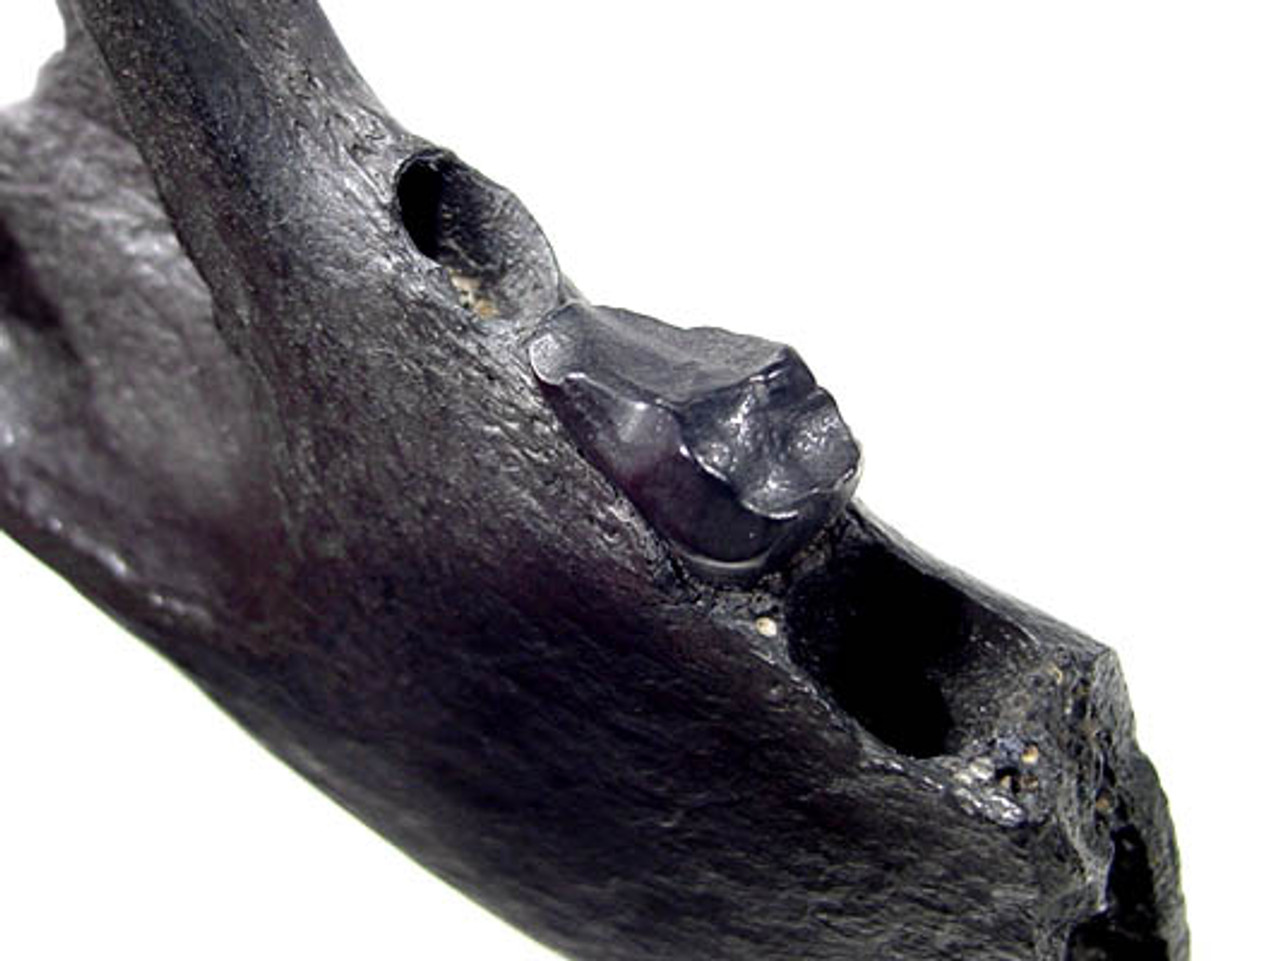 LM43-002 - EXTREMELY RARE  AMPHICYON "BONE-CRUSHING BEAR-DOG" JAW WITH INTACT CRUSHING MOLAR TOOTH 